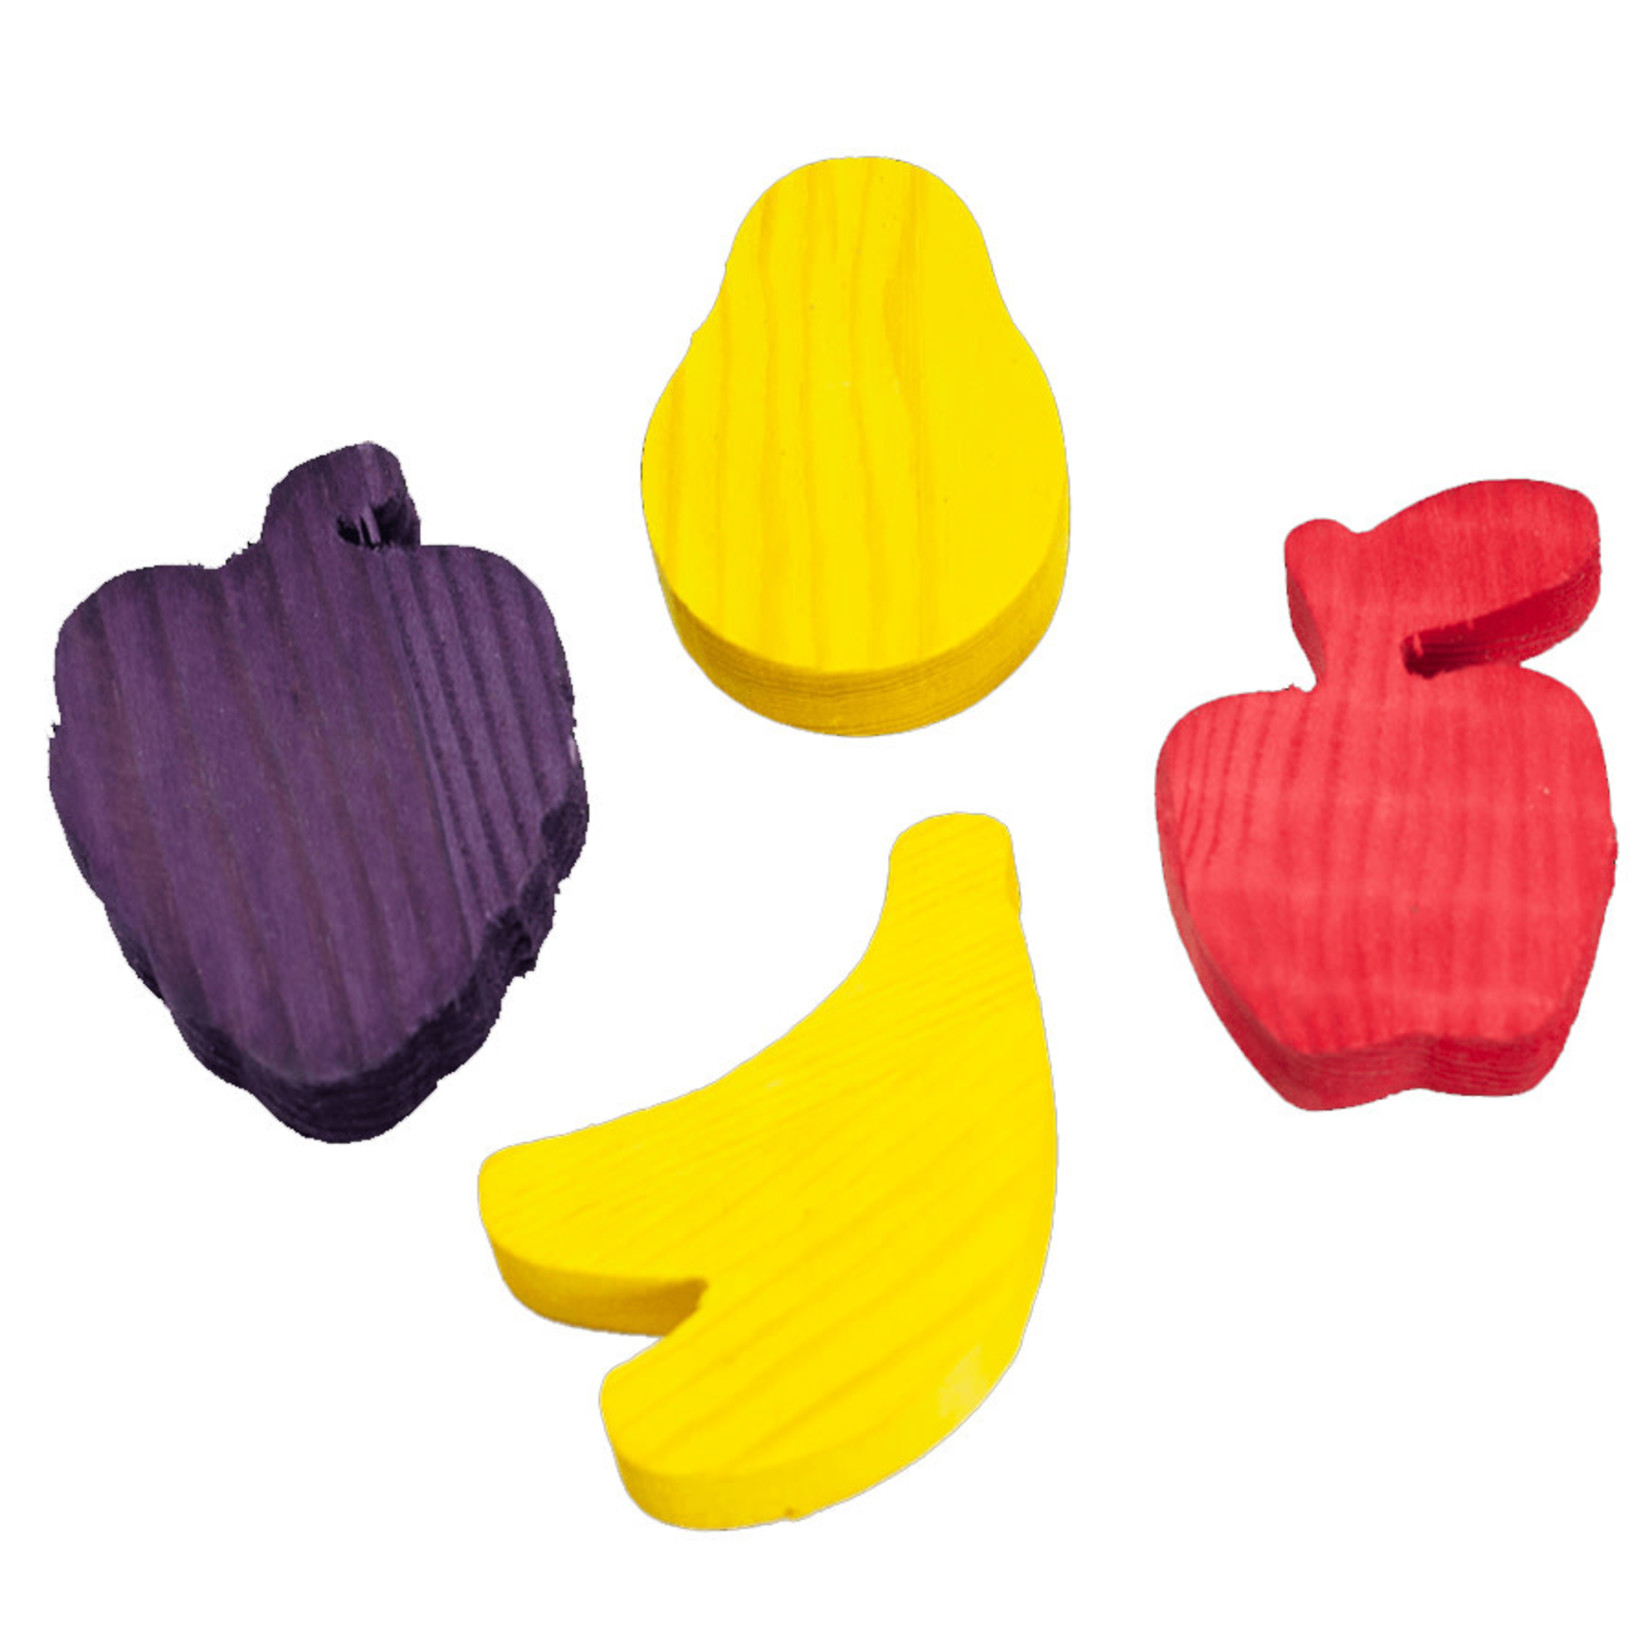 A&E Cage Company Wooden Fruit Chew Toy w/ 4 Fruits Nibbles